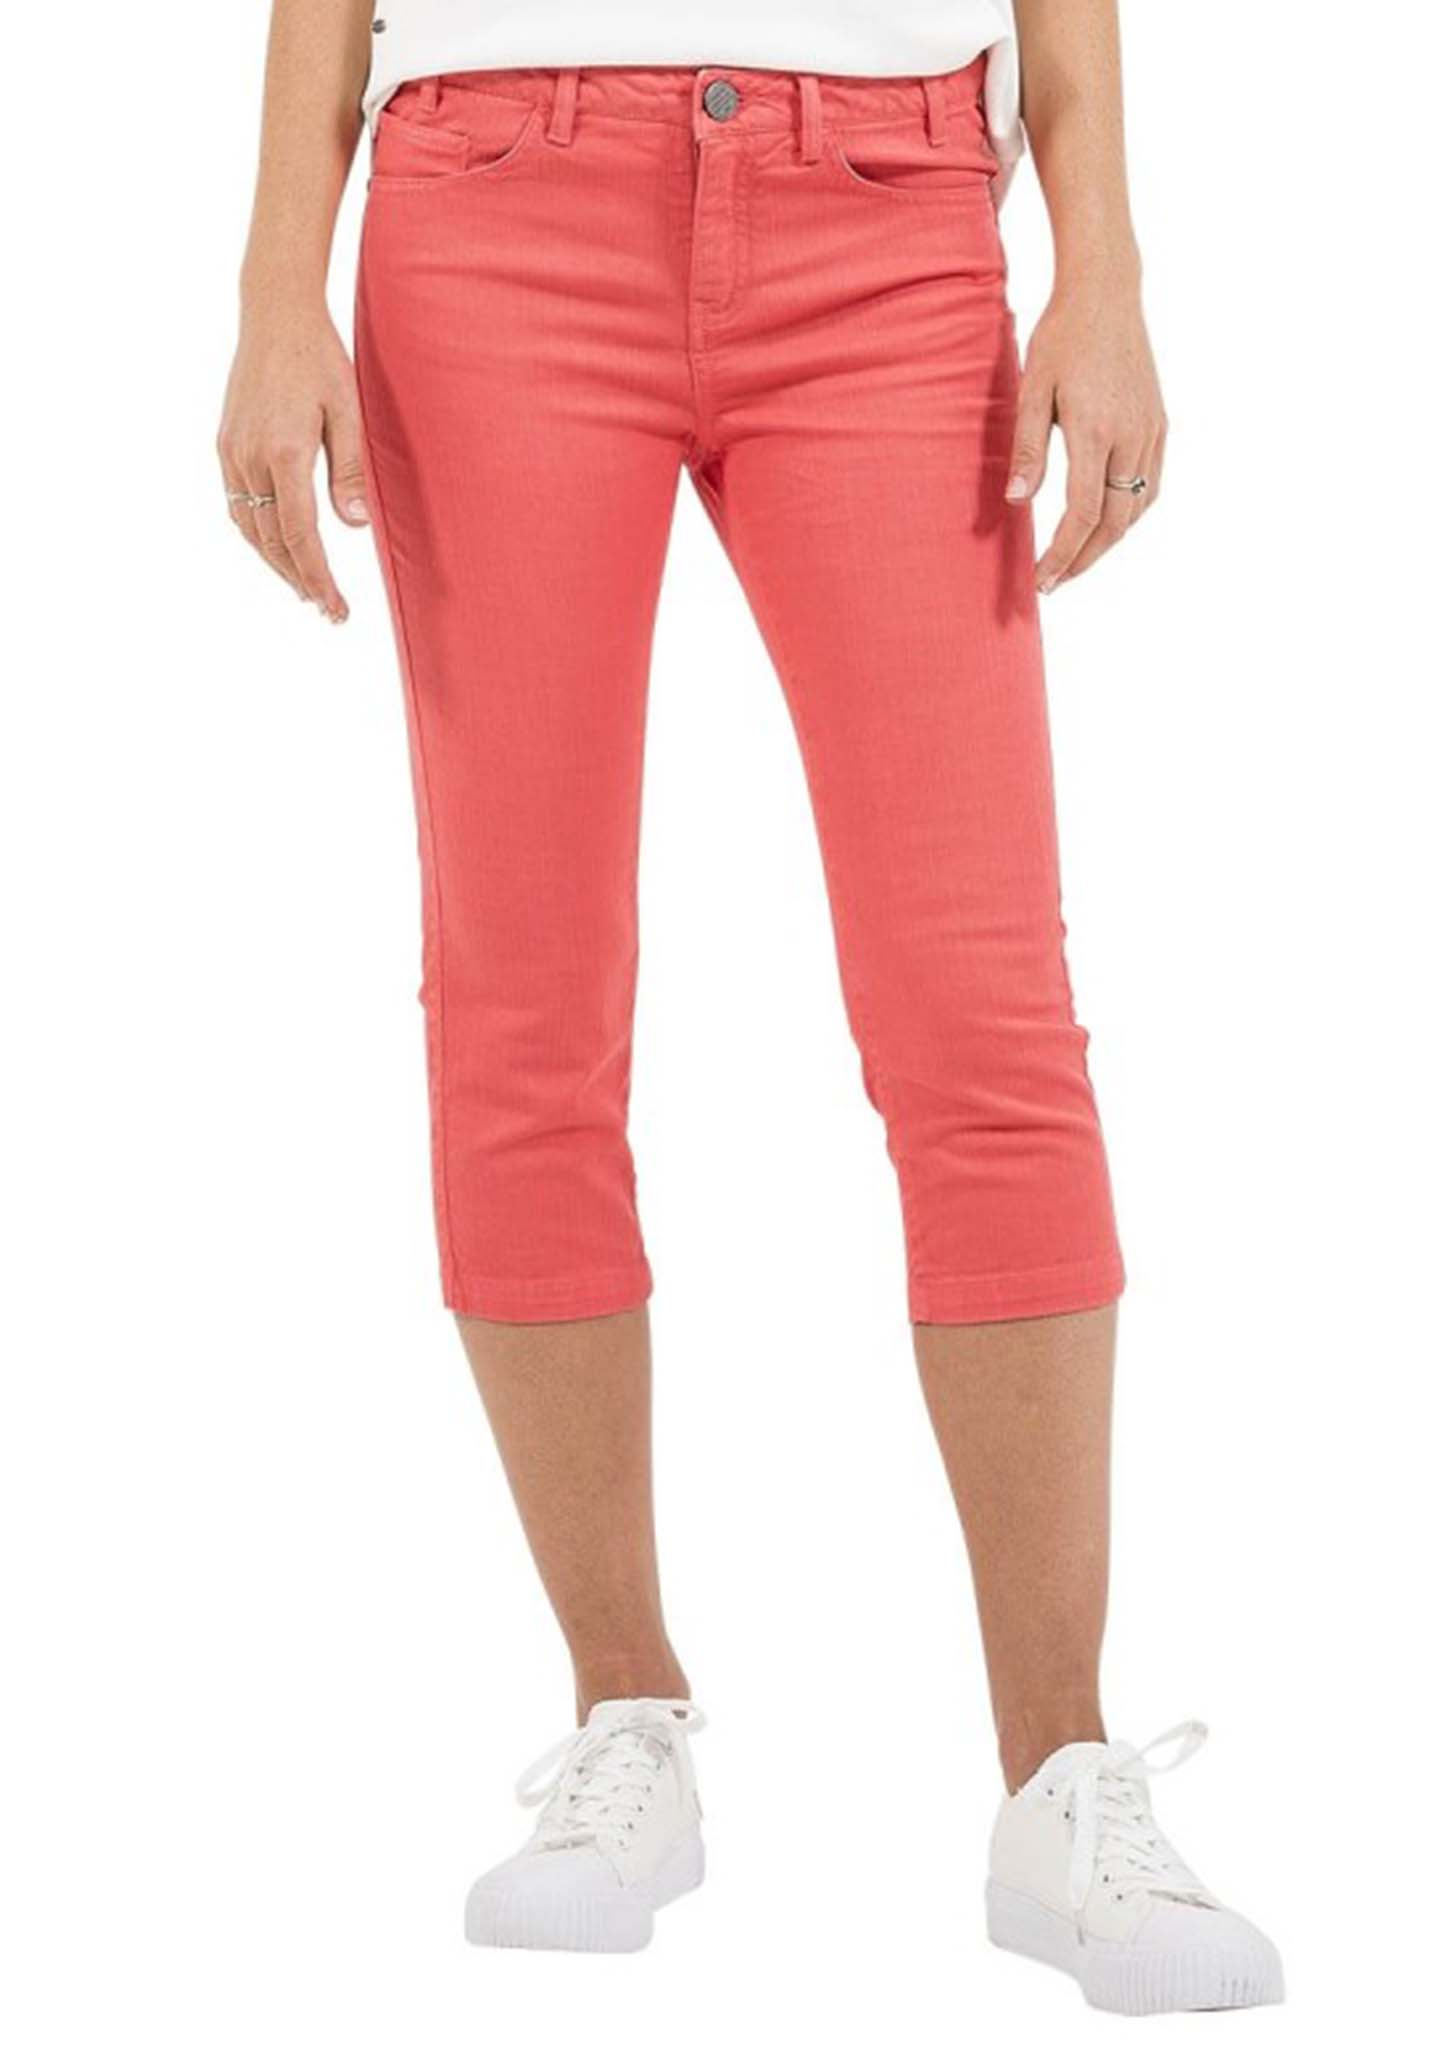 Oxbow Rimella Jeans rouge corail 34/XX